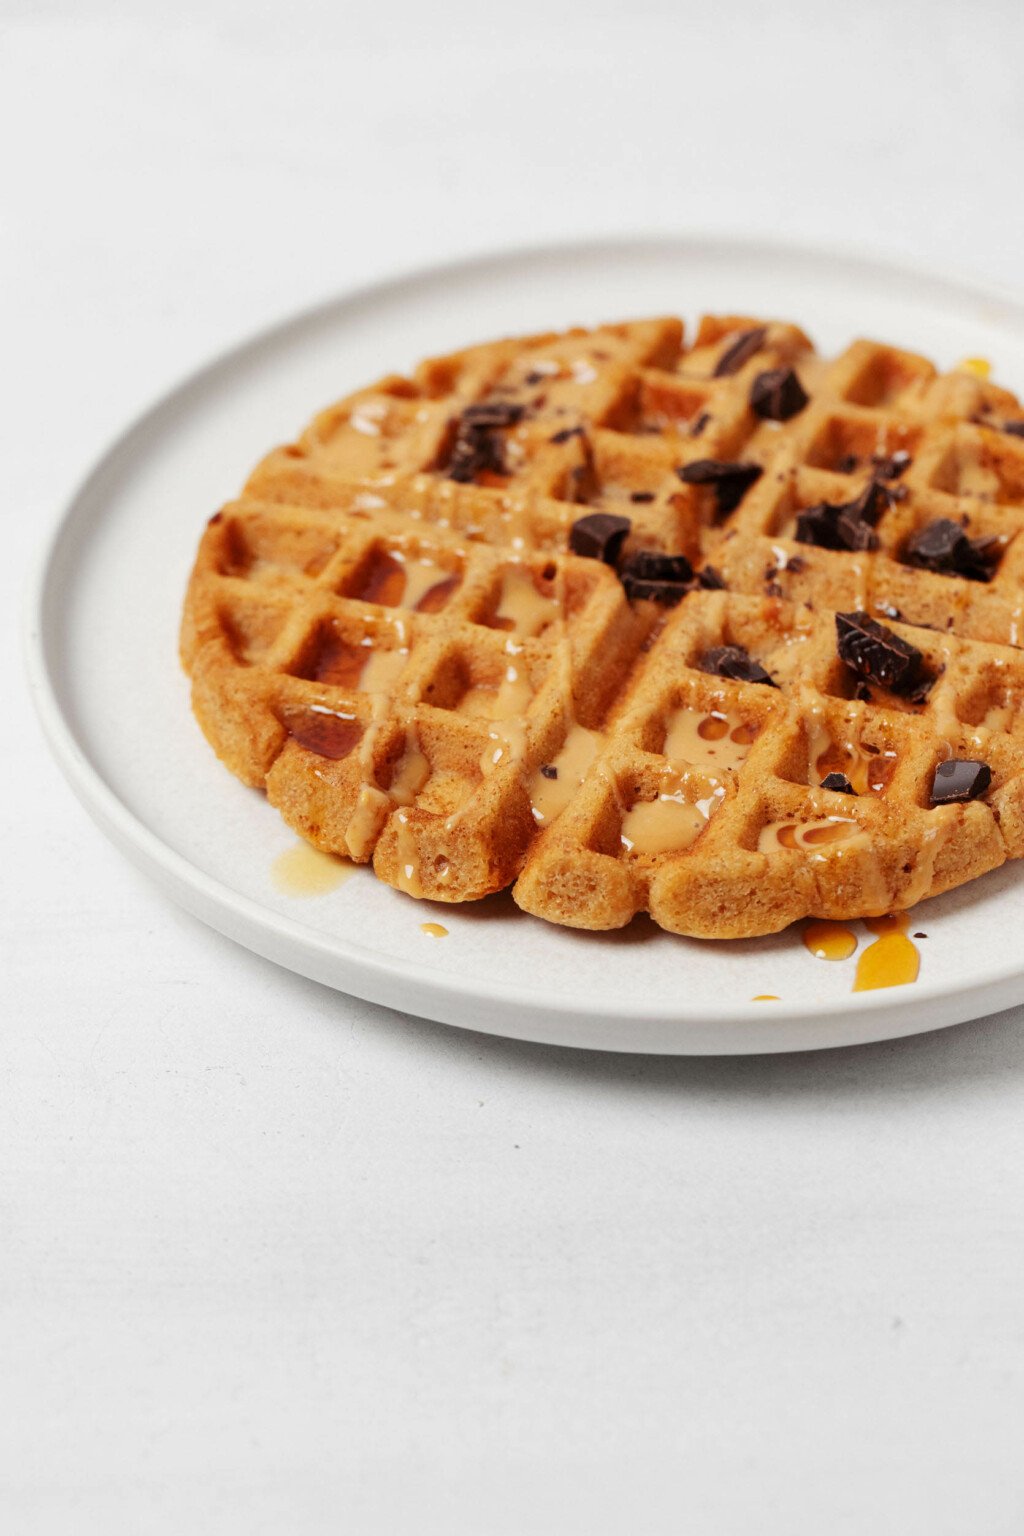 An angled image of a round, white plate, resting on a white surface. The plate holds a Belgian-style vegan peanut butter waffle, which is topped with chocolate and peanut butter drizzle.